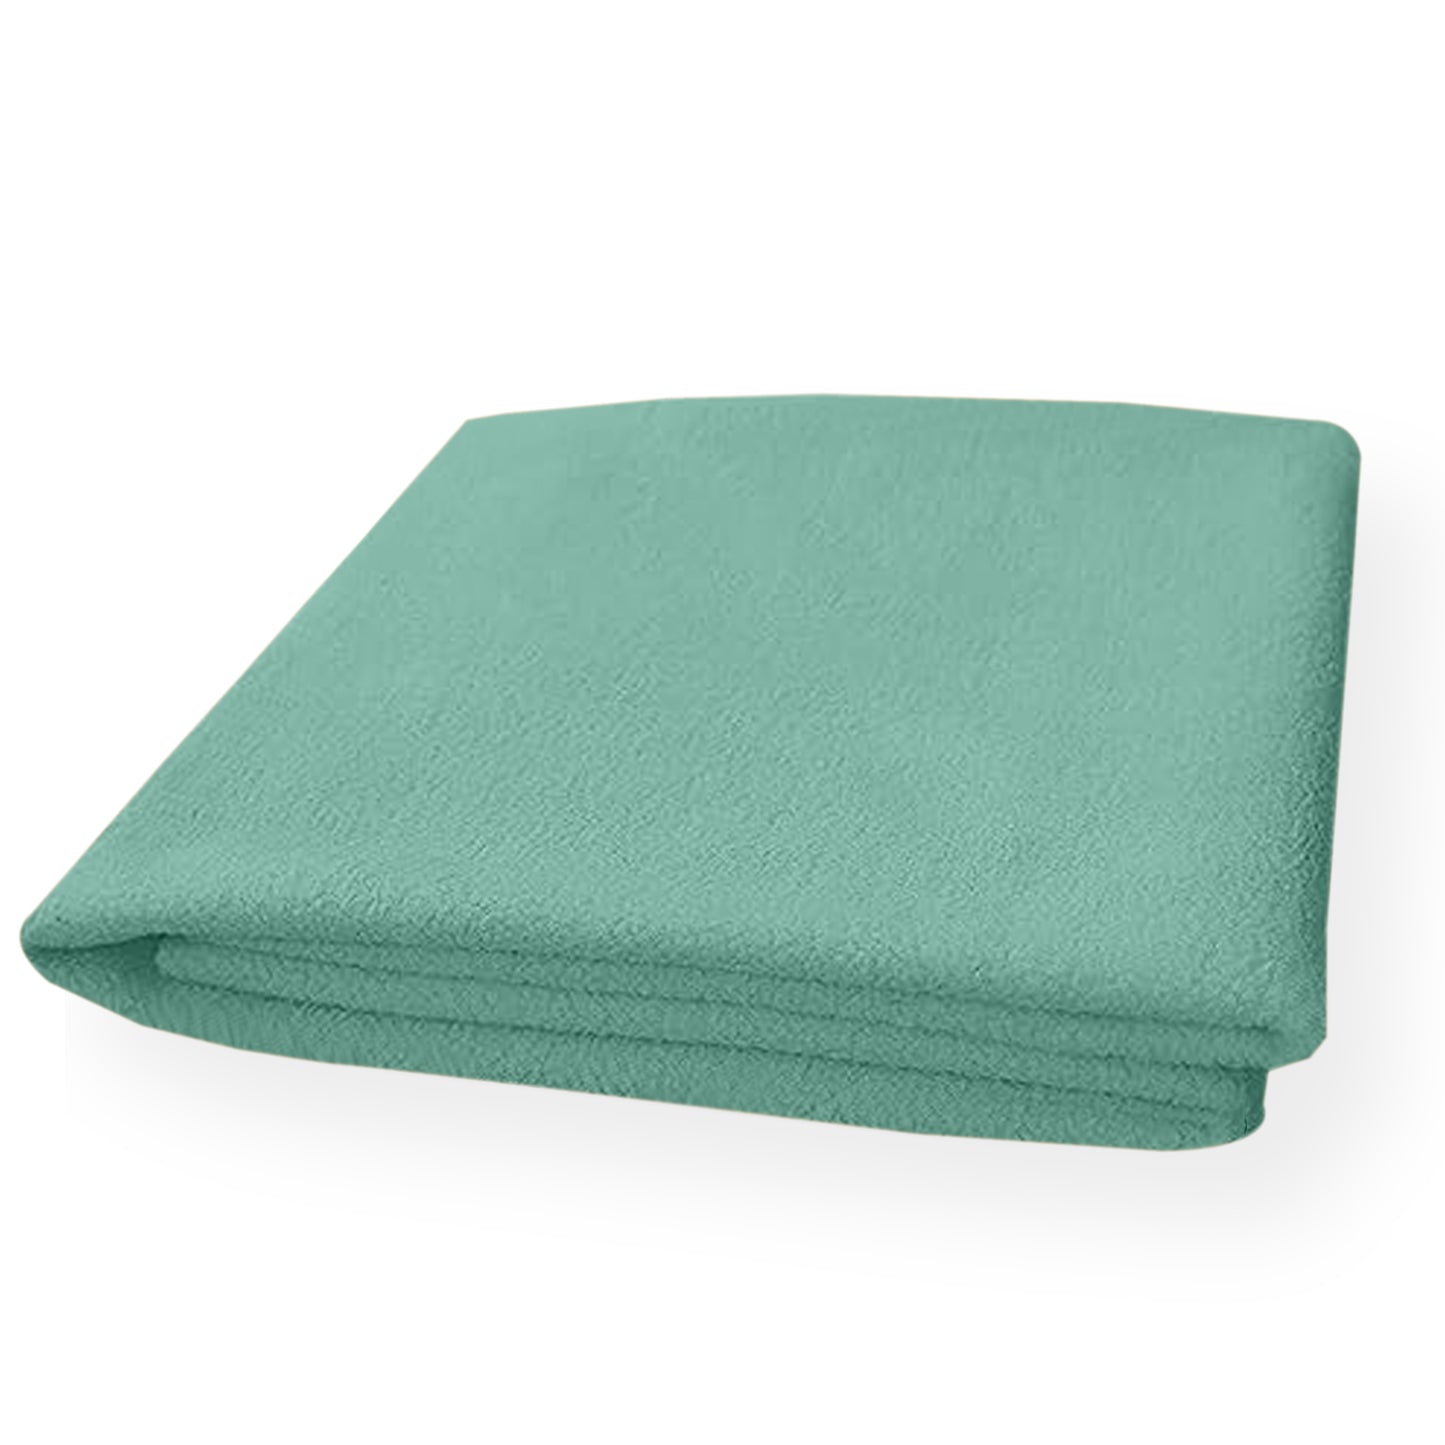 Waterproof Bed Protector, Quick Dry Sheet, Baby Bed Protector (70 X 100 CM), Pack of 1 -SEA GREEN